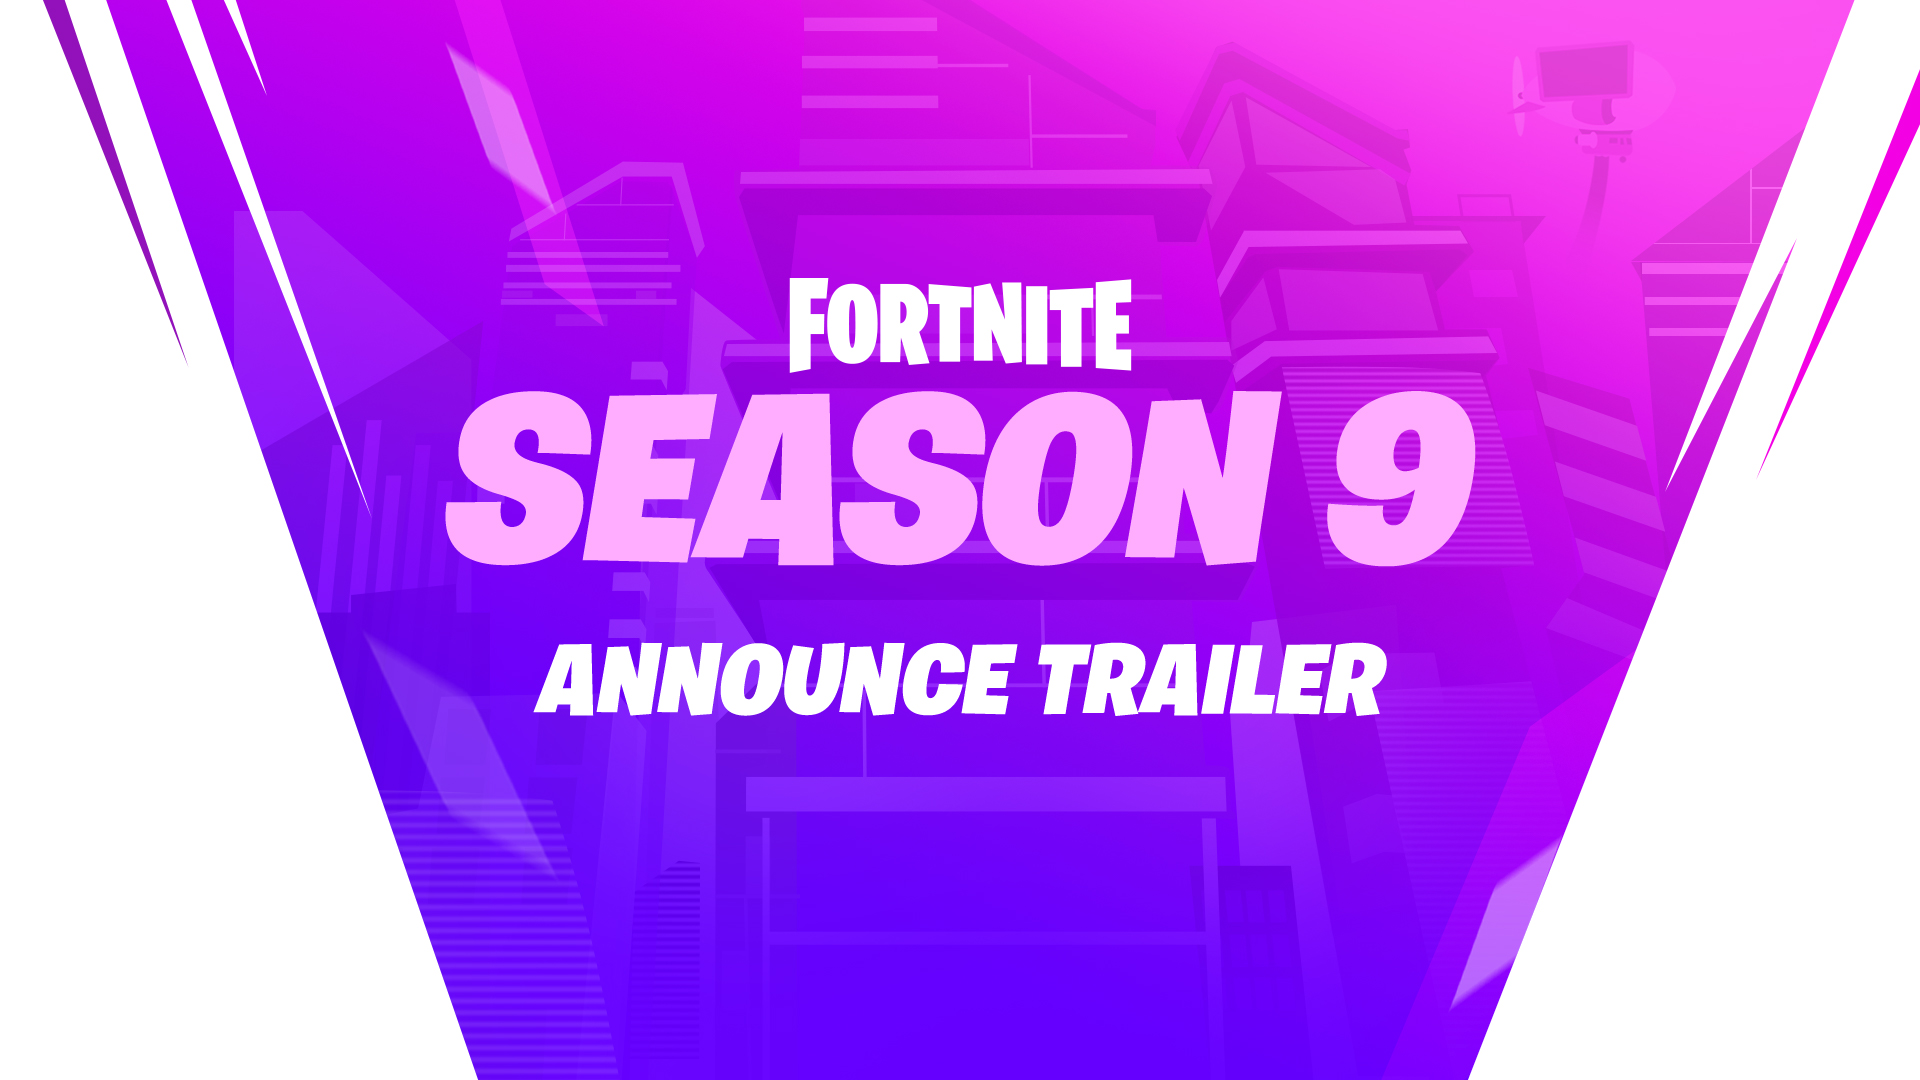 play fortnite season 9 announce trailer outline of a building in pink to black gradient - fortnite gfx pack download season 7